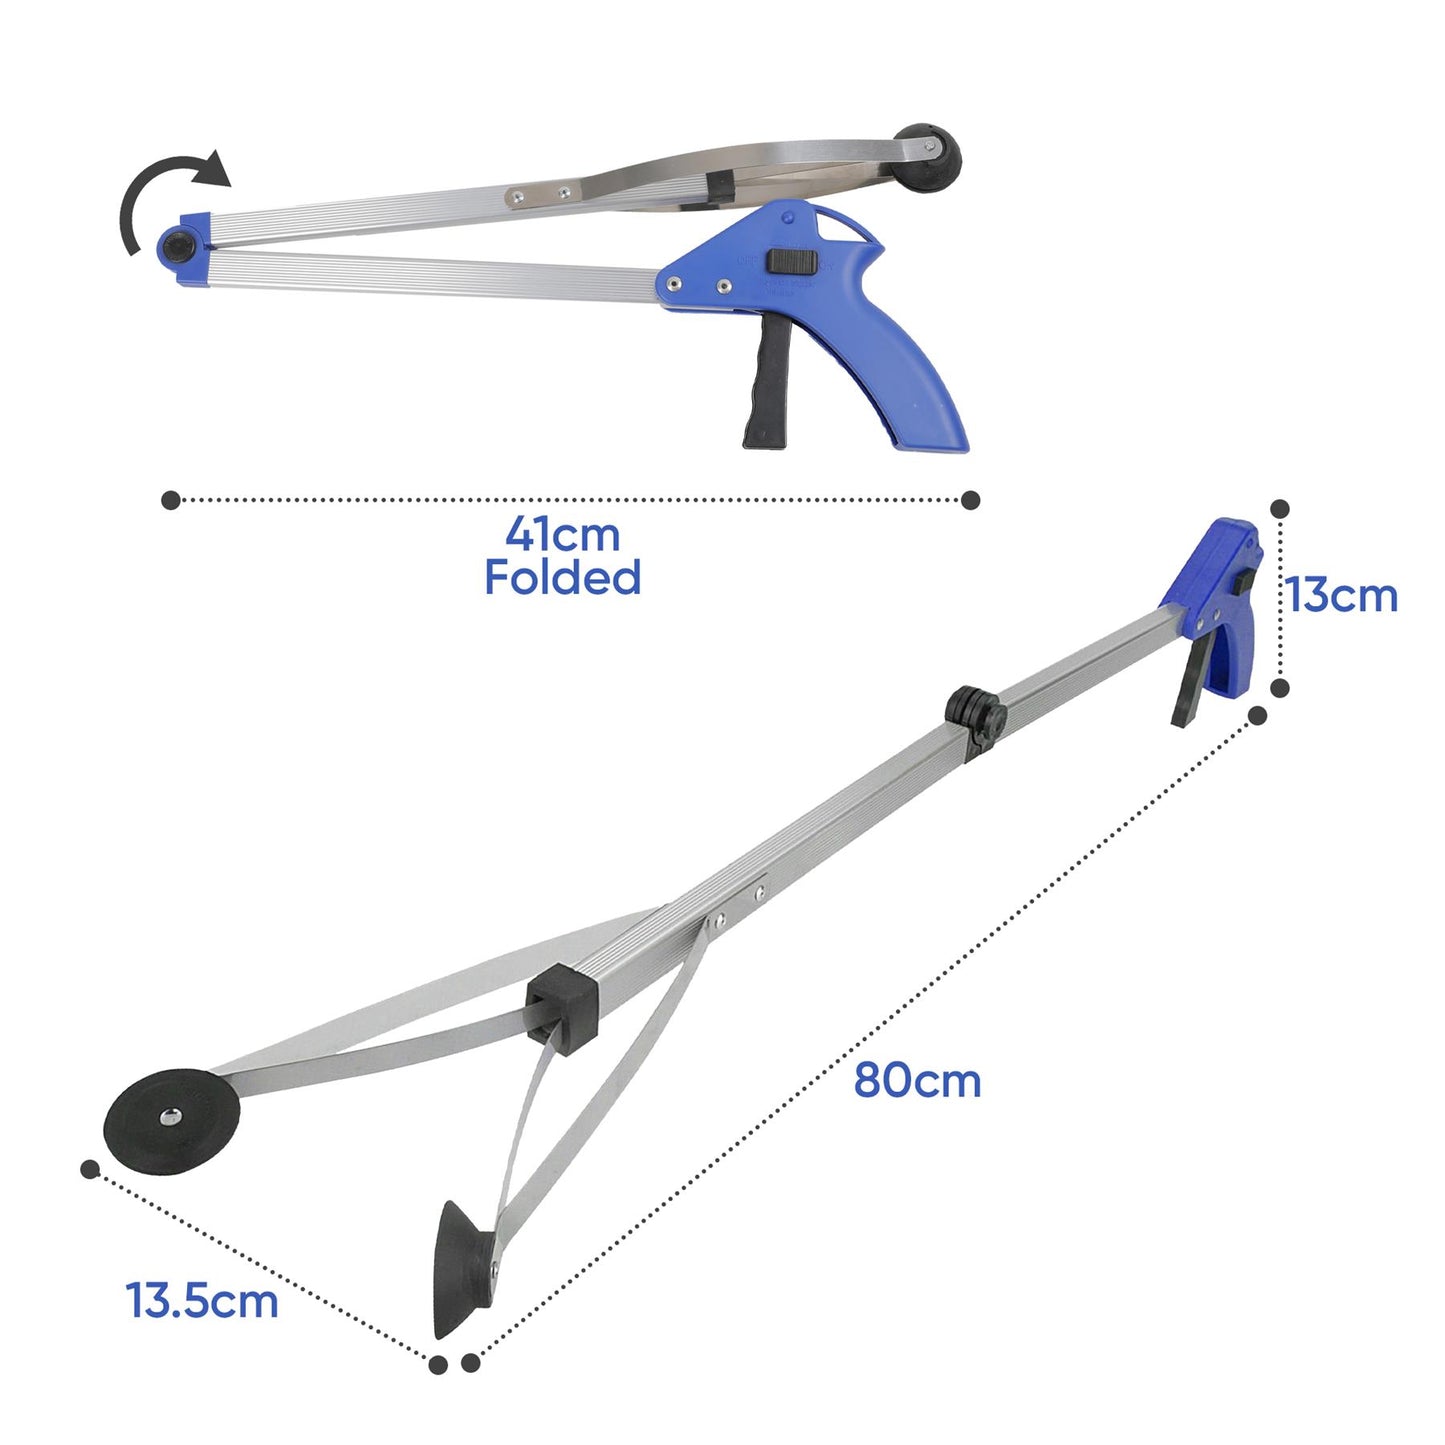 Lightweight Folding Grabber Tool For Litter Picking And Reaching Difficult Areas